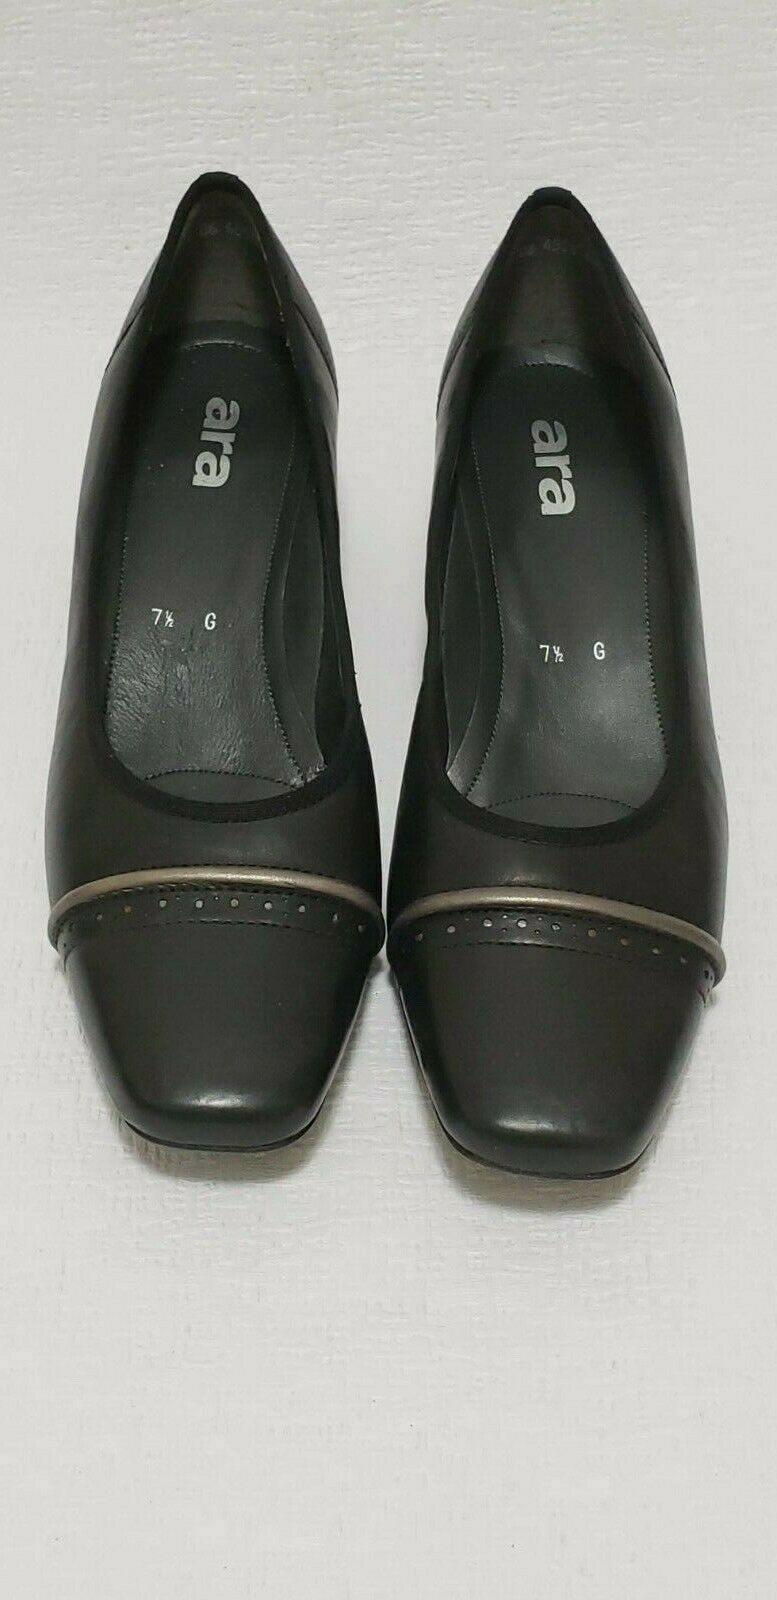 ARA Roma 34846-08G Pumps Classic Casual Shoes Black Leather US 10 G Normal Wide - SVNYFancy